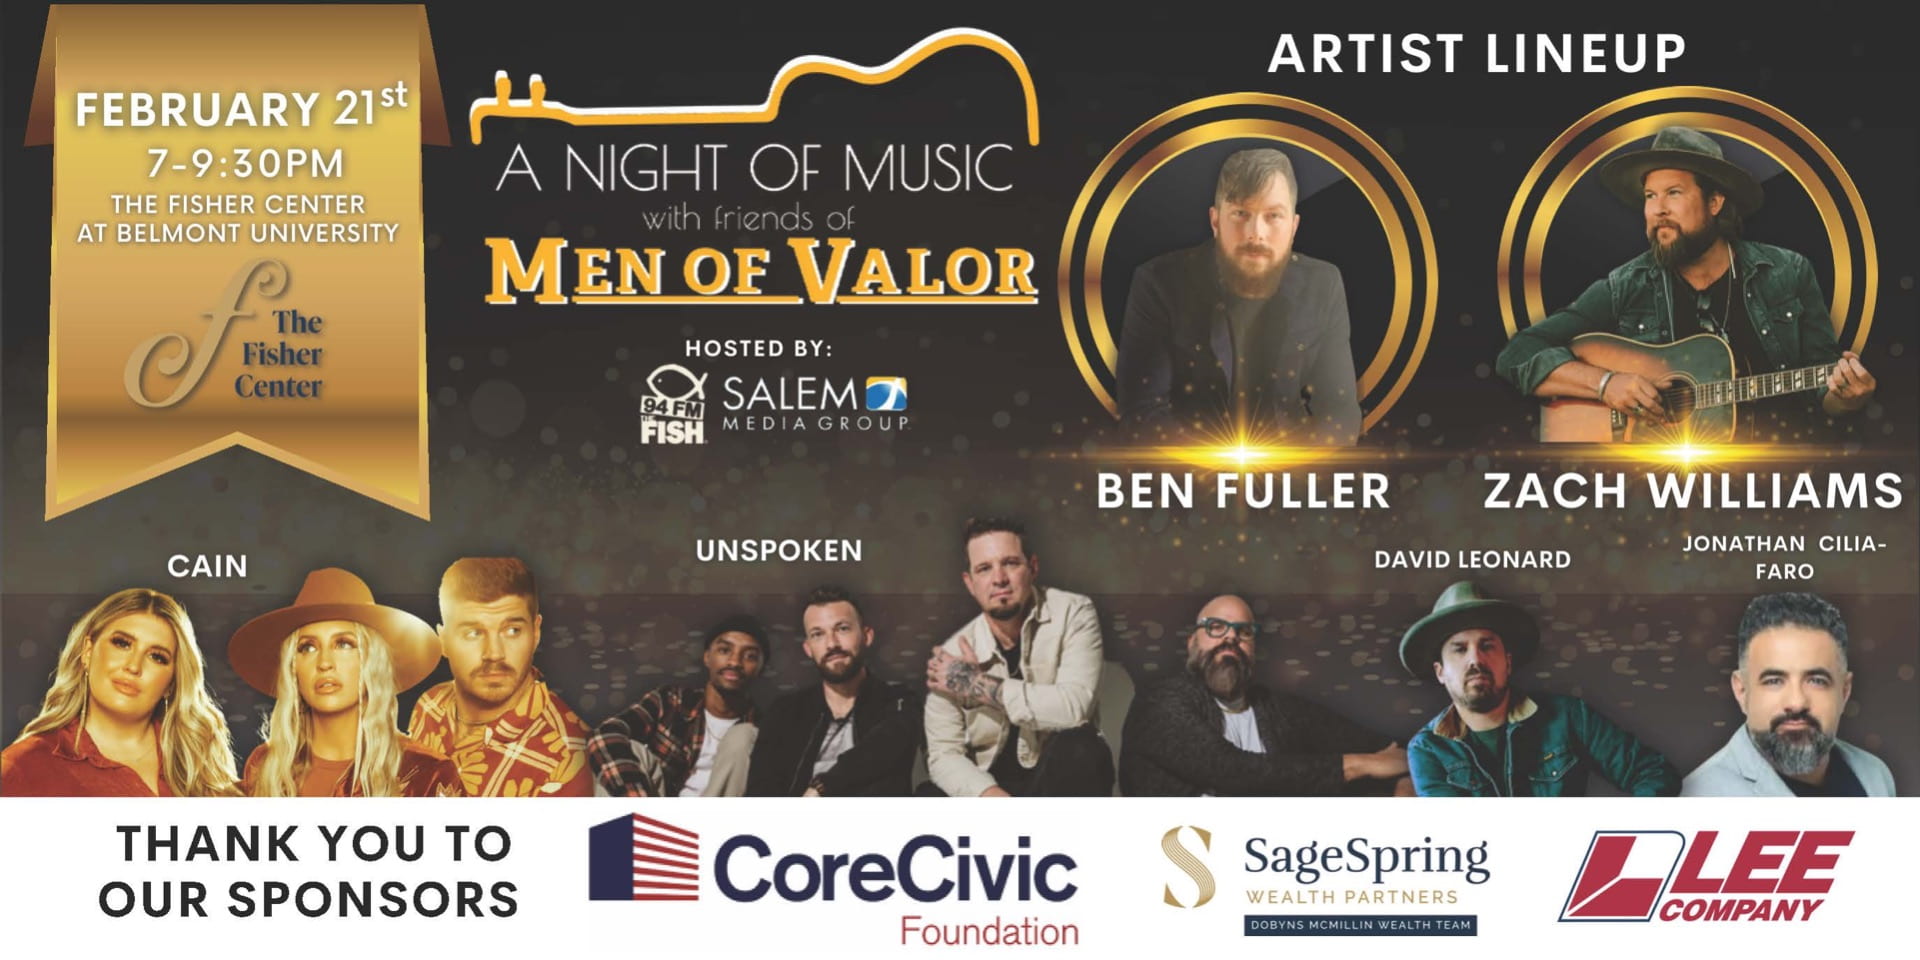 A Night of Music with Friends of Men of Valor